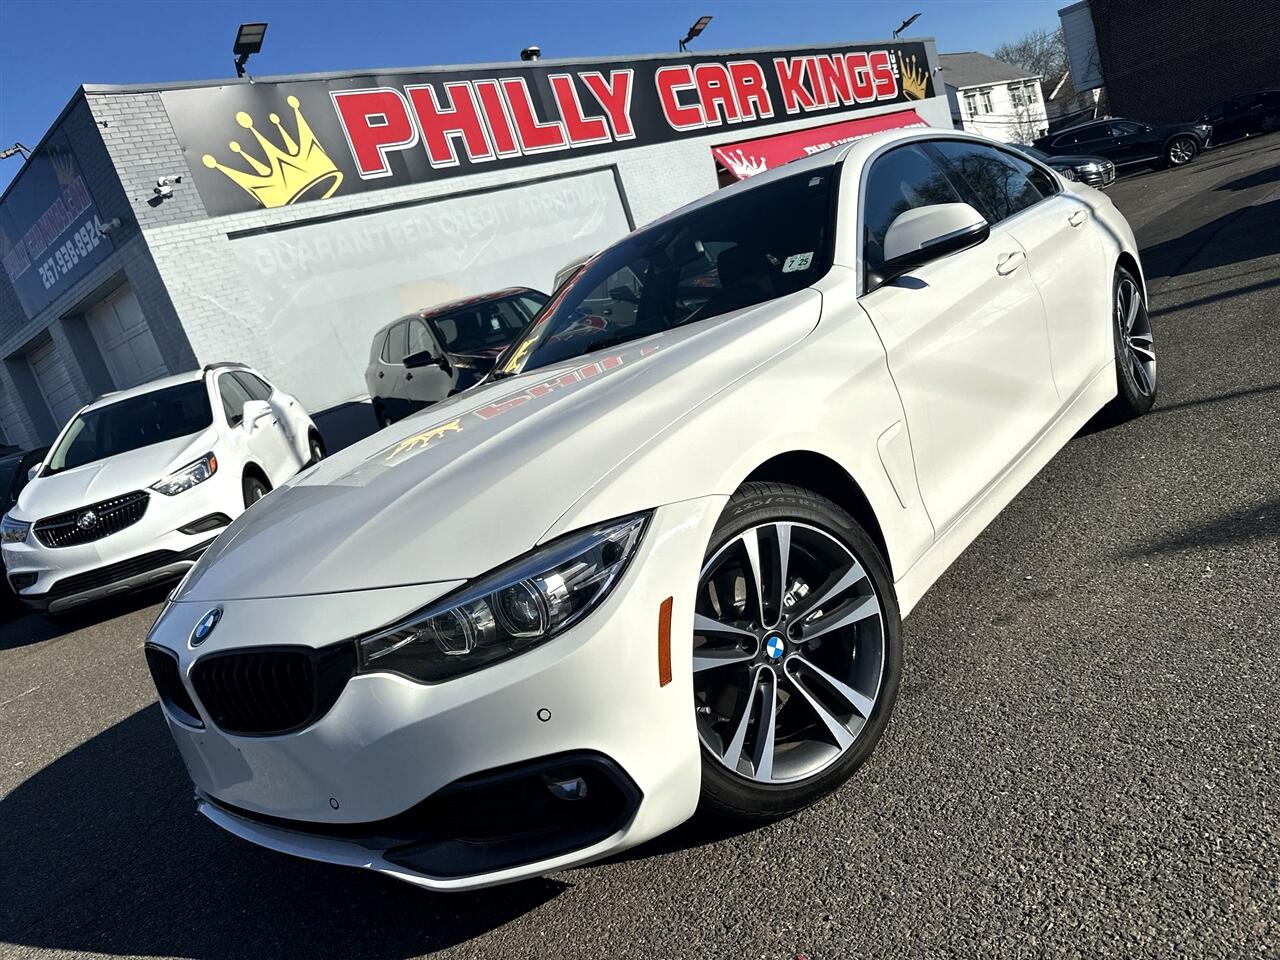 Used 2020 BMW 4-Series Gran Coupe 430i Gran Coupe RWD for Sale in  Philadelphia PA 19111 Philly Car Kings Inc